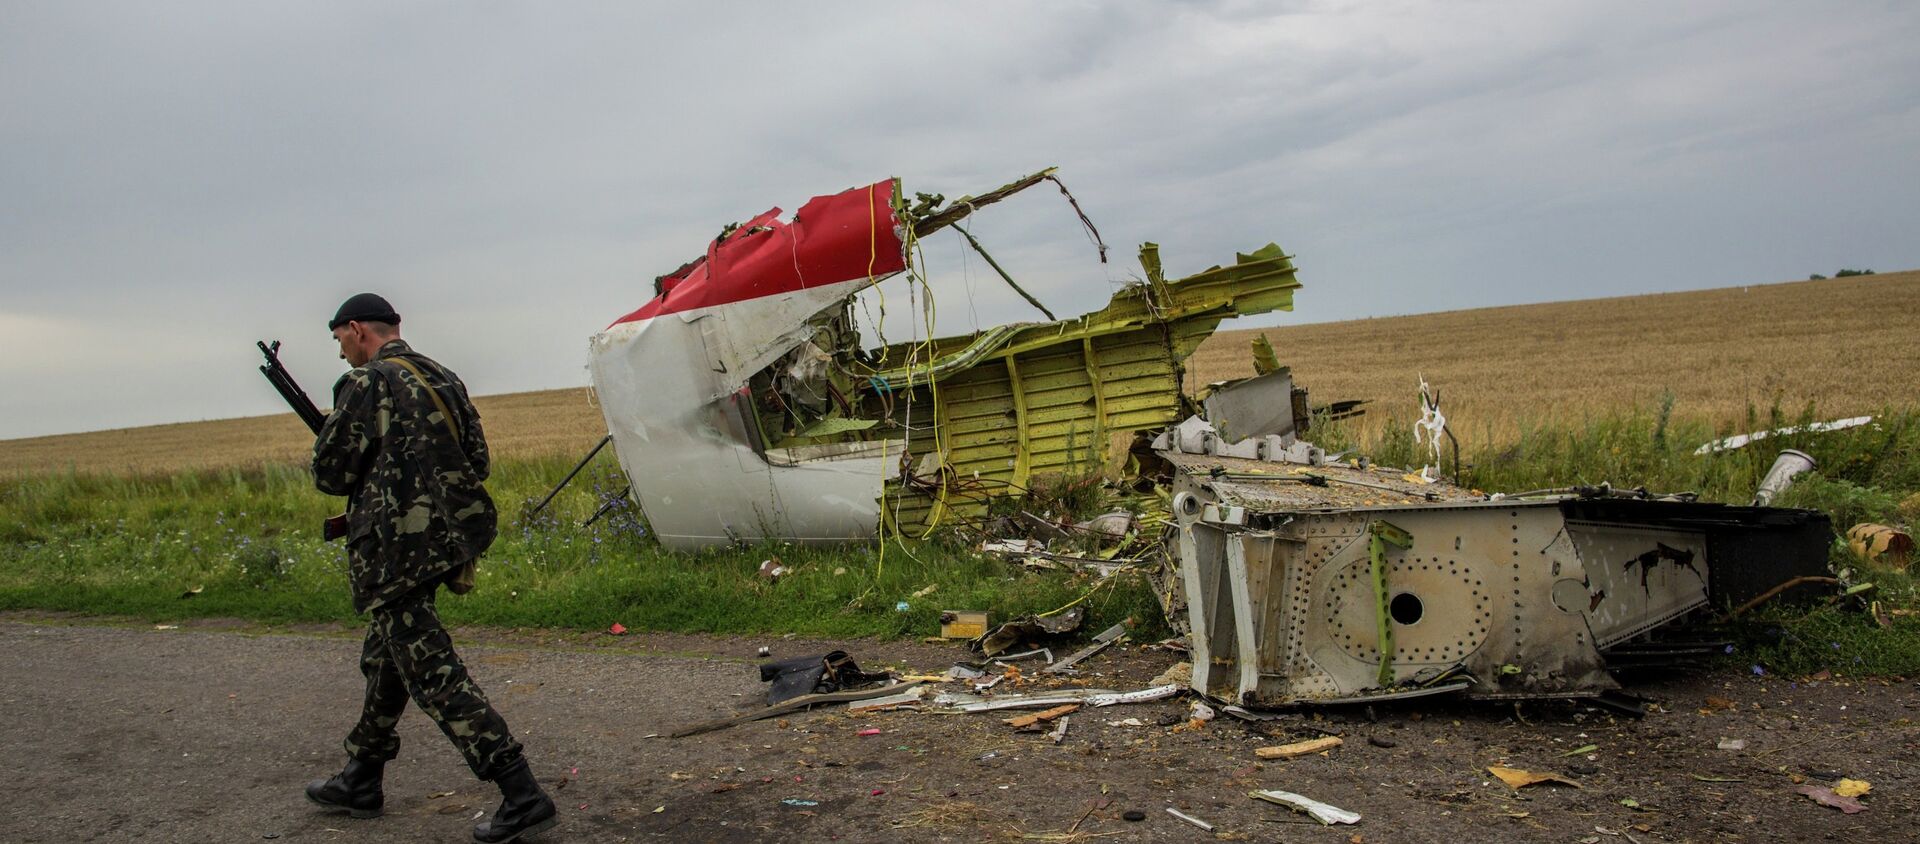 At the crash site of Malaysia Airlines flight MH17 in Ukraine - Sputnik International, 1920, 17.07.2020